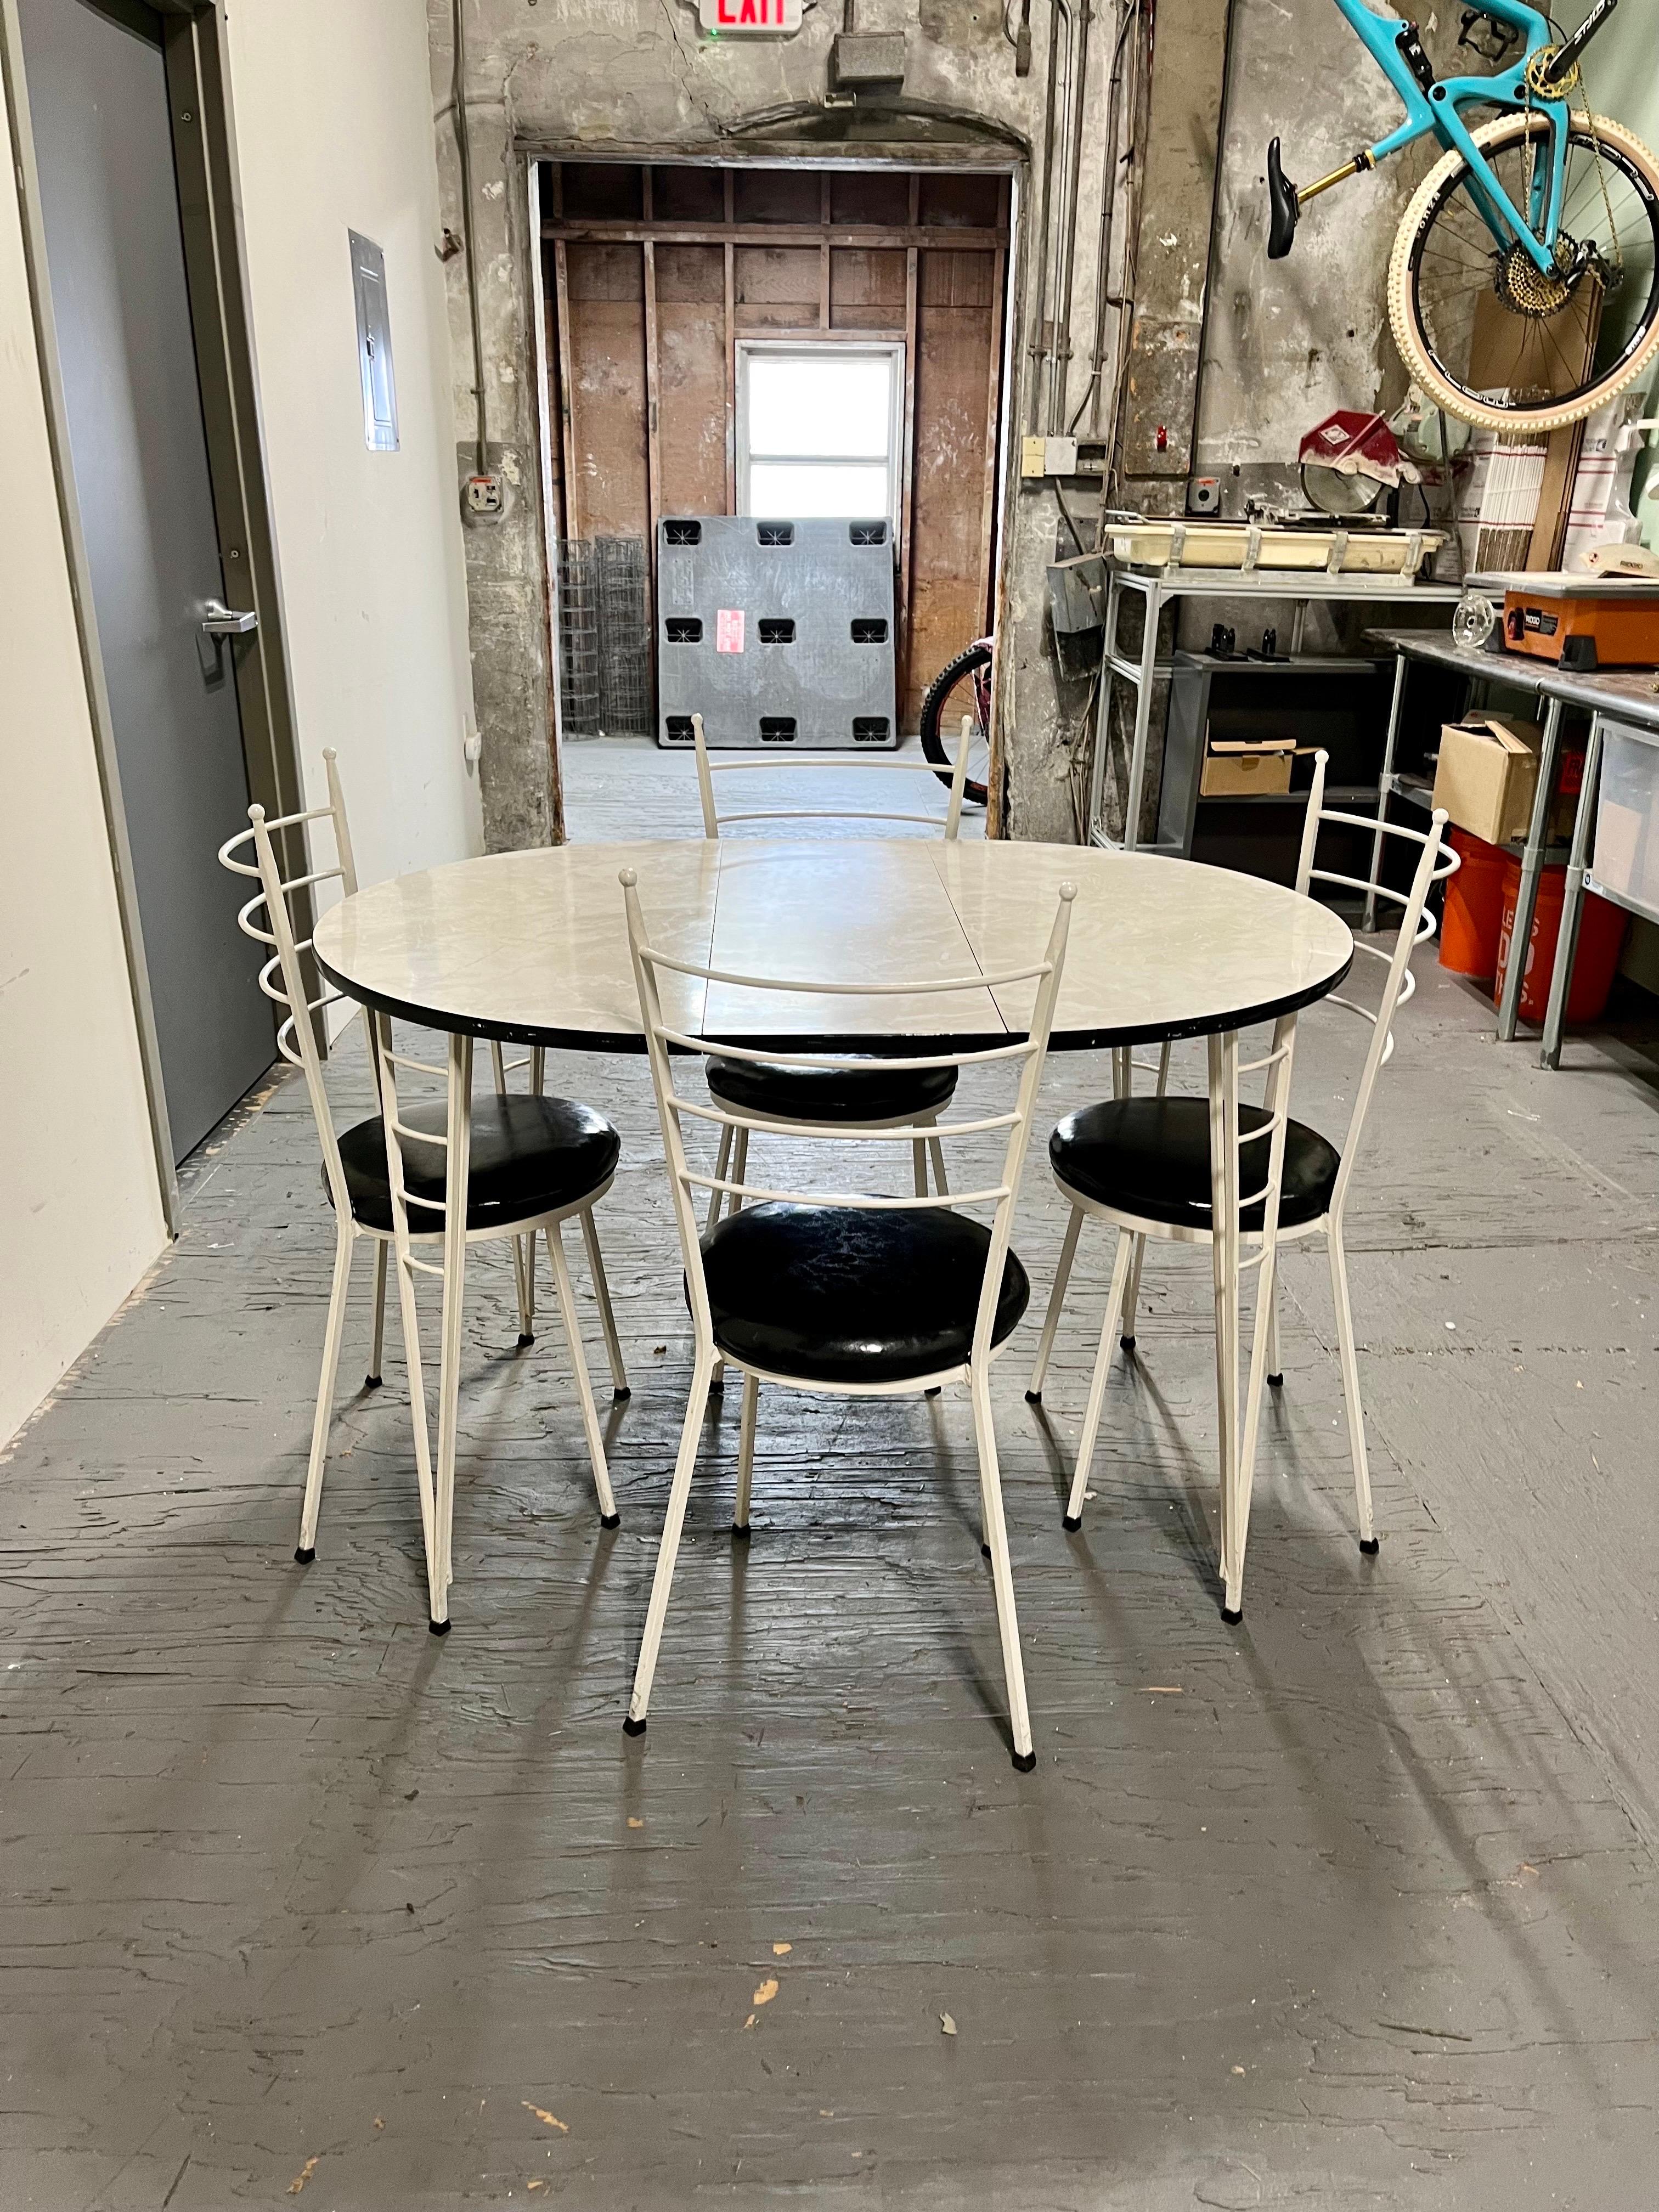 Sleek modern wrought iron and faux marble formica dining table and 4 chairs. Table has 1 leaf. Great period look with a mix of McCobb and Ponti vibes. 
36x30
47.5x30 with leaf.
Curbside to NYC/Philly $400